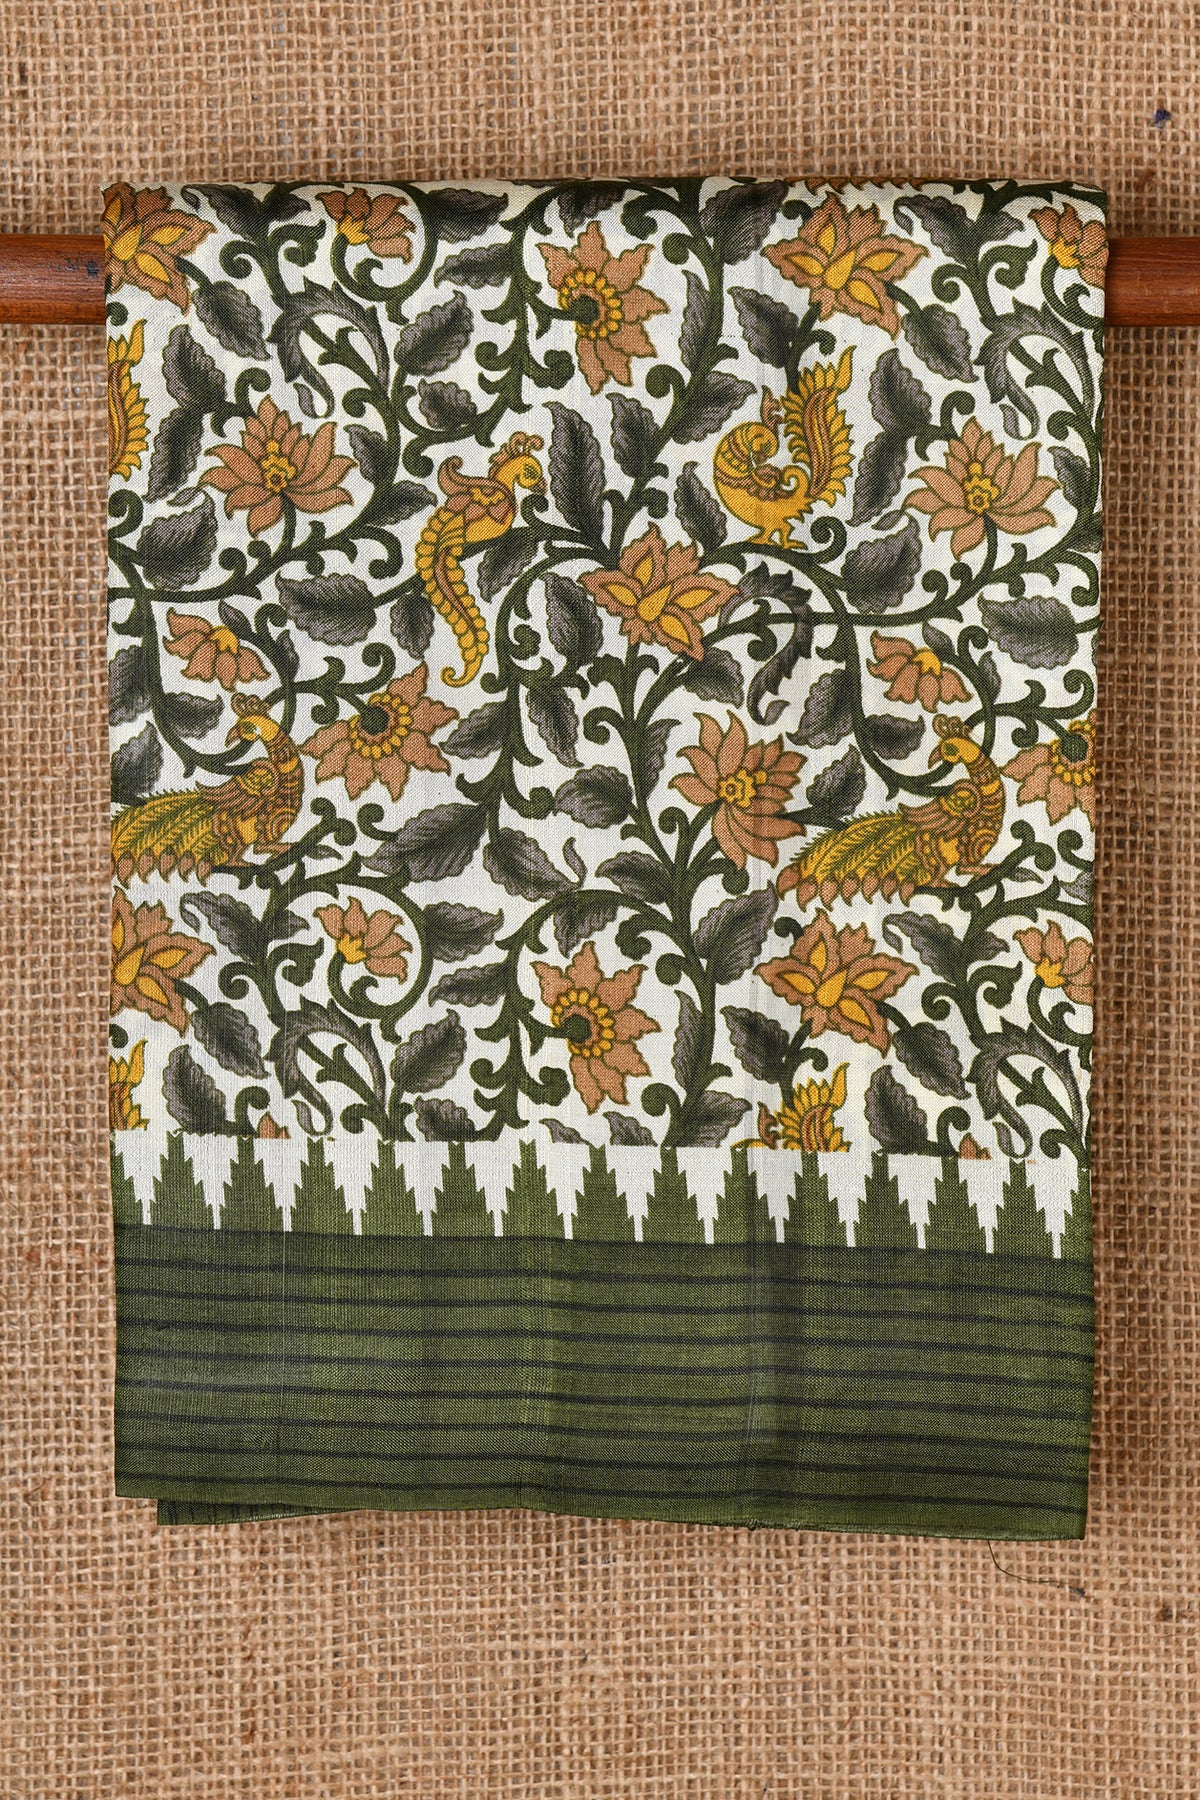 Temple Border Floral Design Ivory And Green Printed Silk Saree